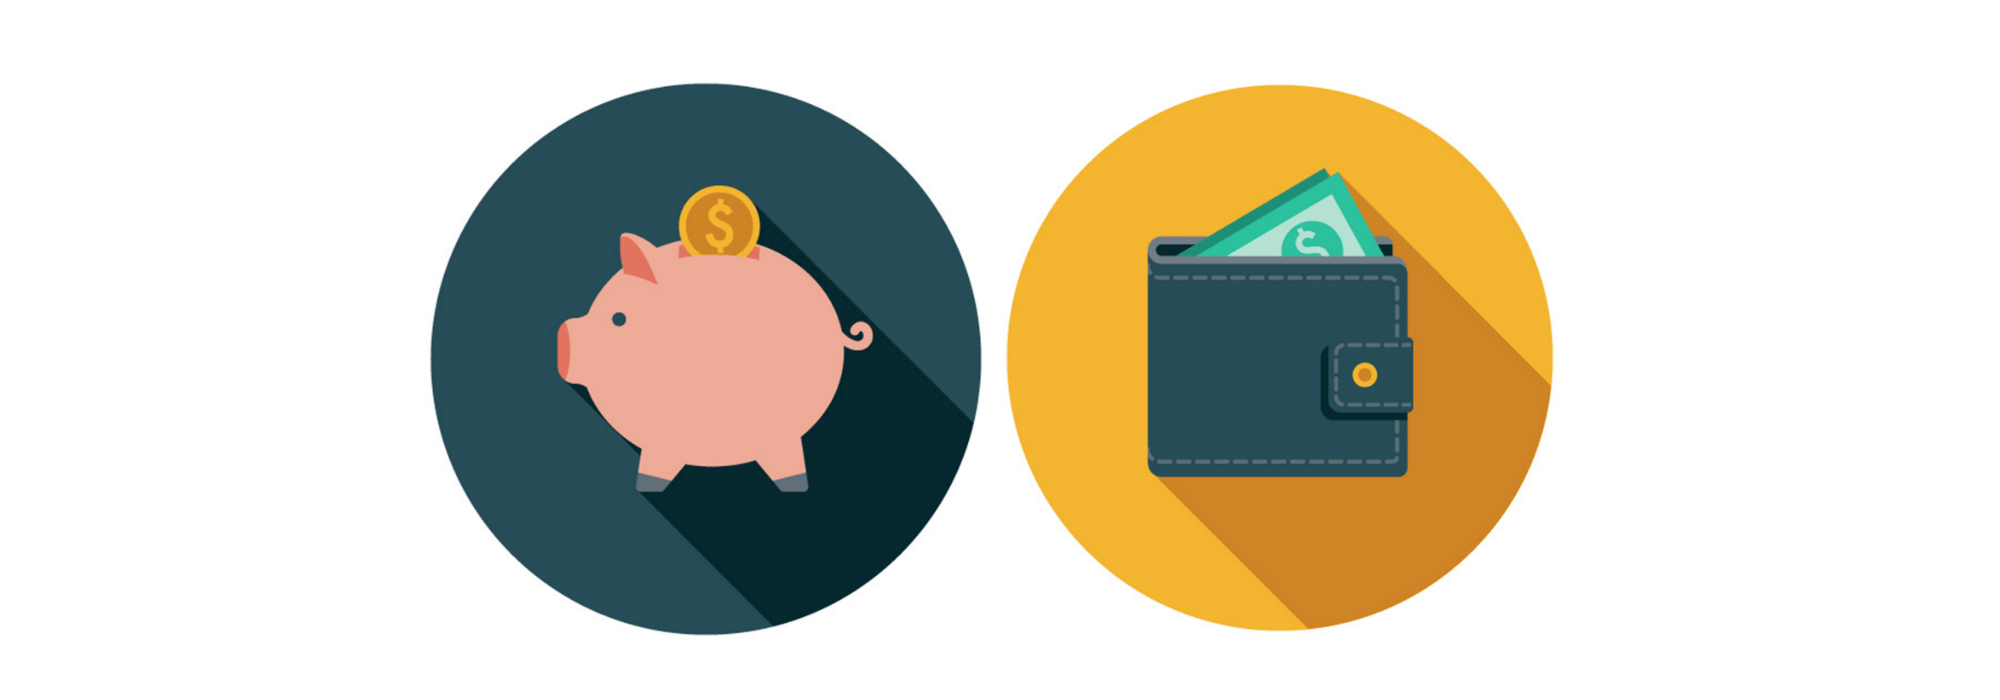 icons of piggy bank and wallet